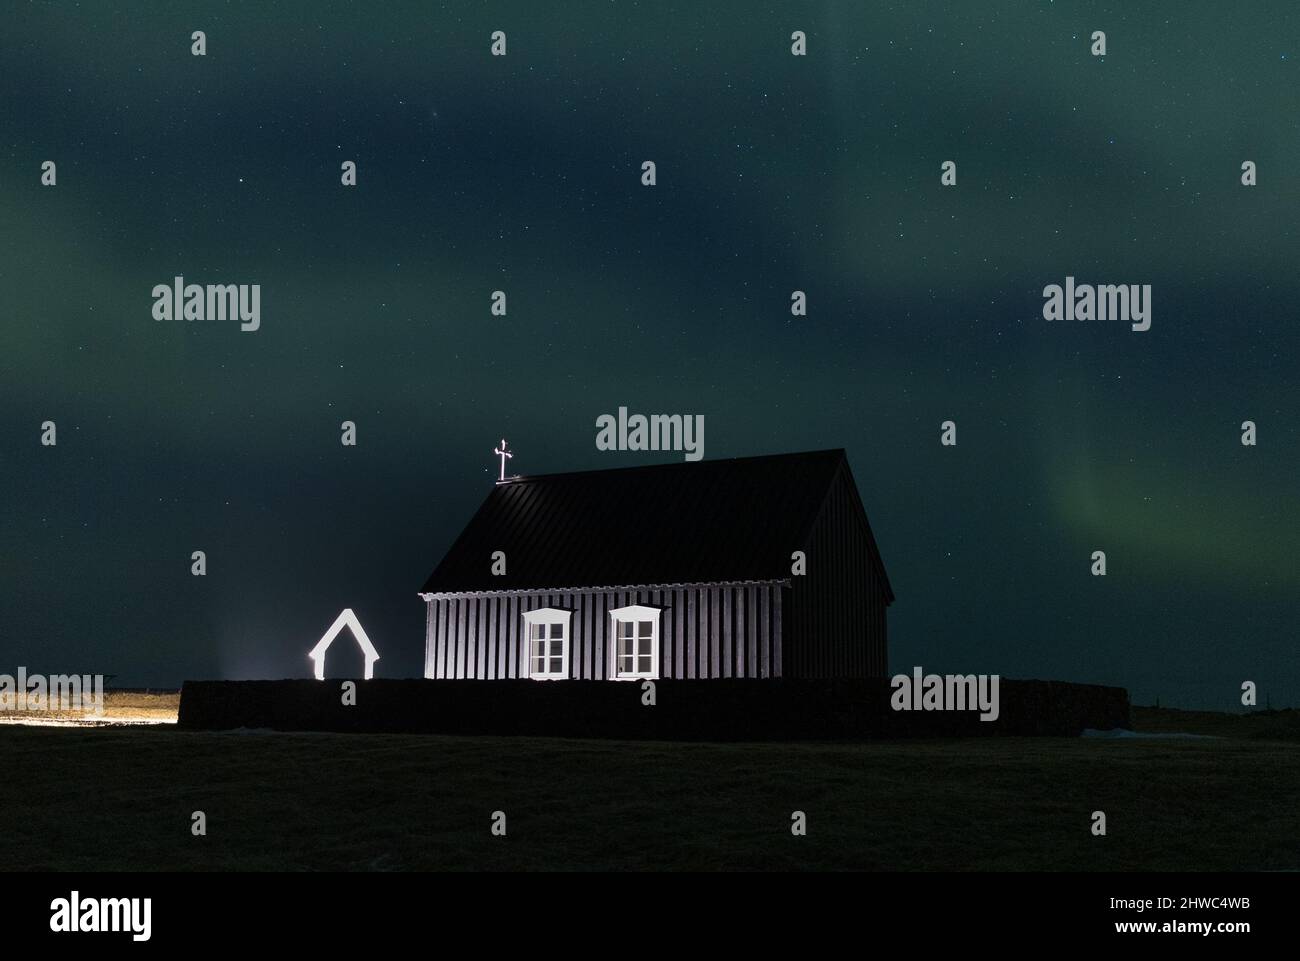 Northern lights over a black church in Iceland Stock Photo